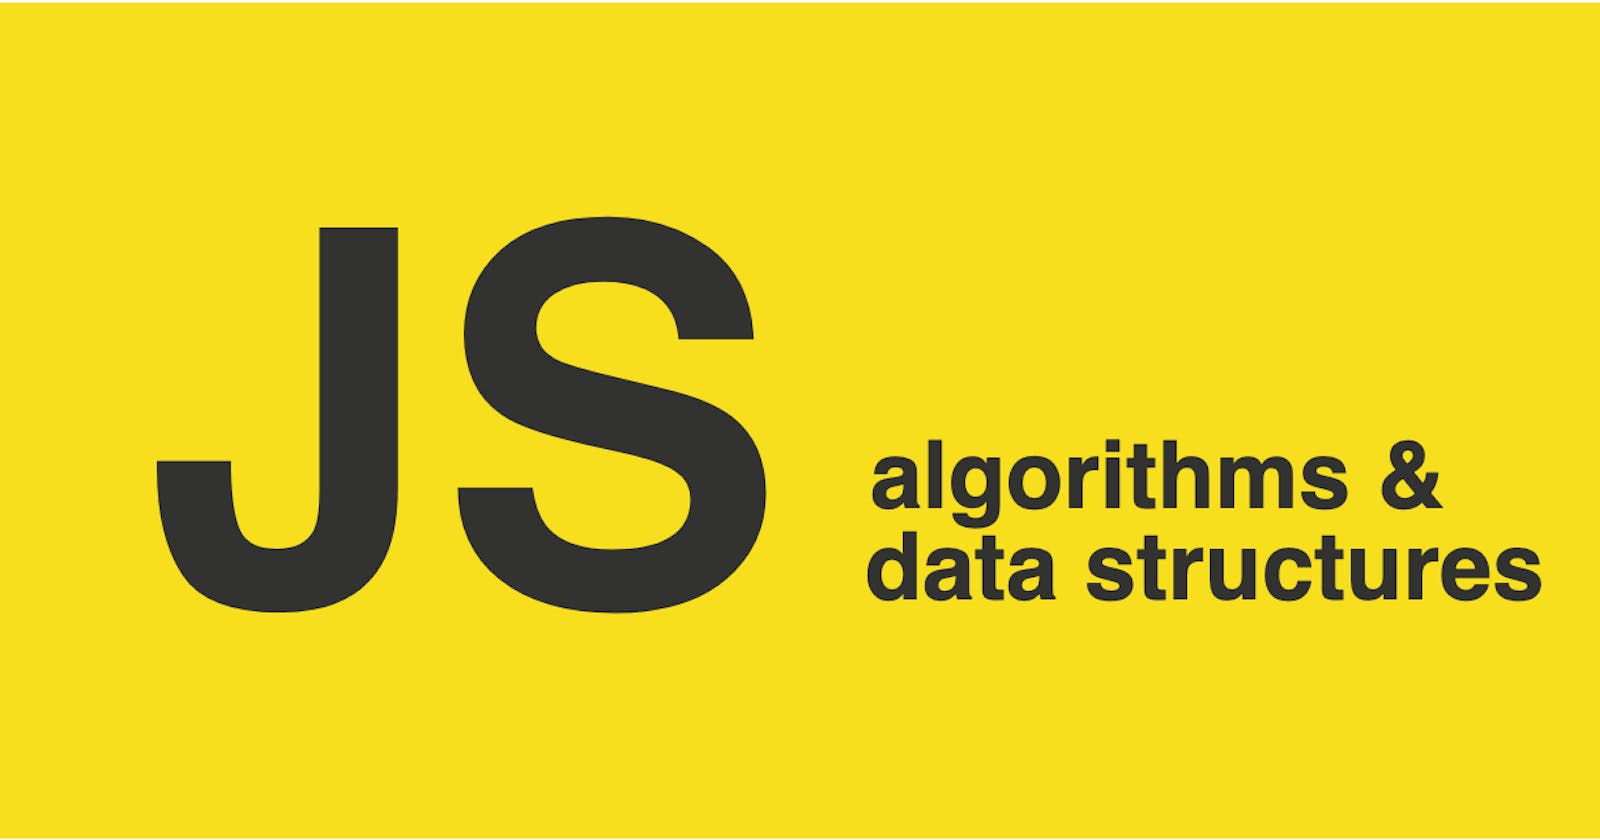 What you need to know about sorting algorithms — JavaScript